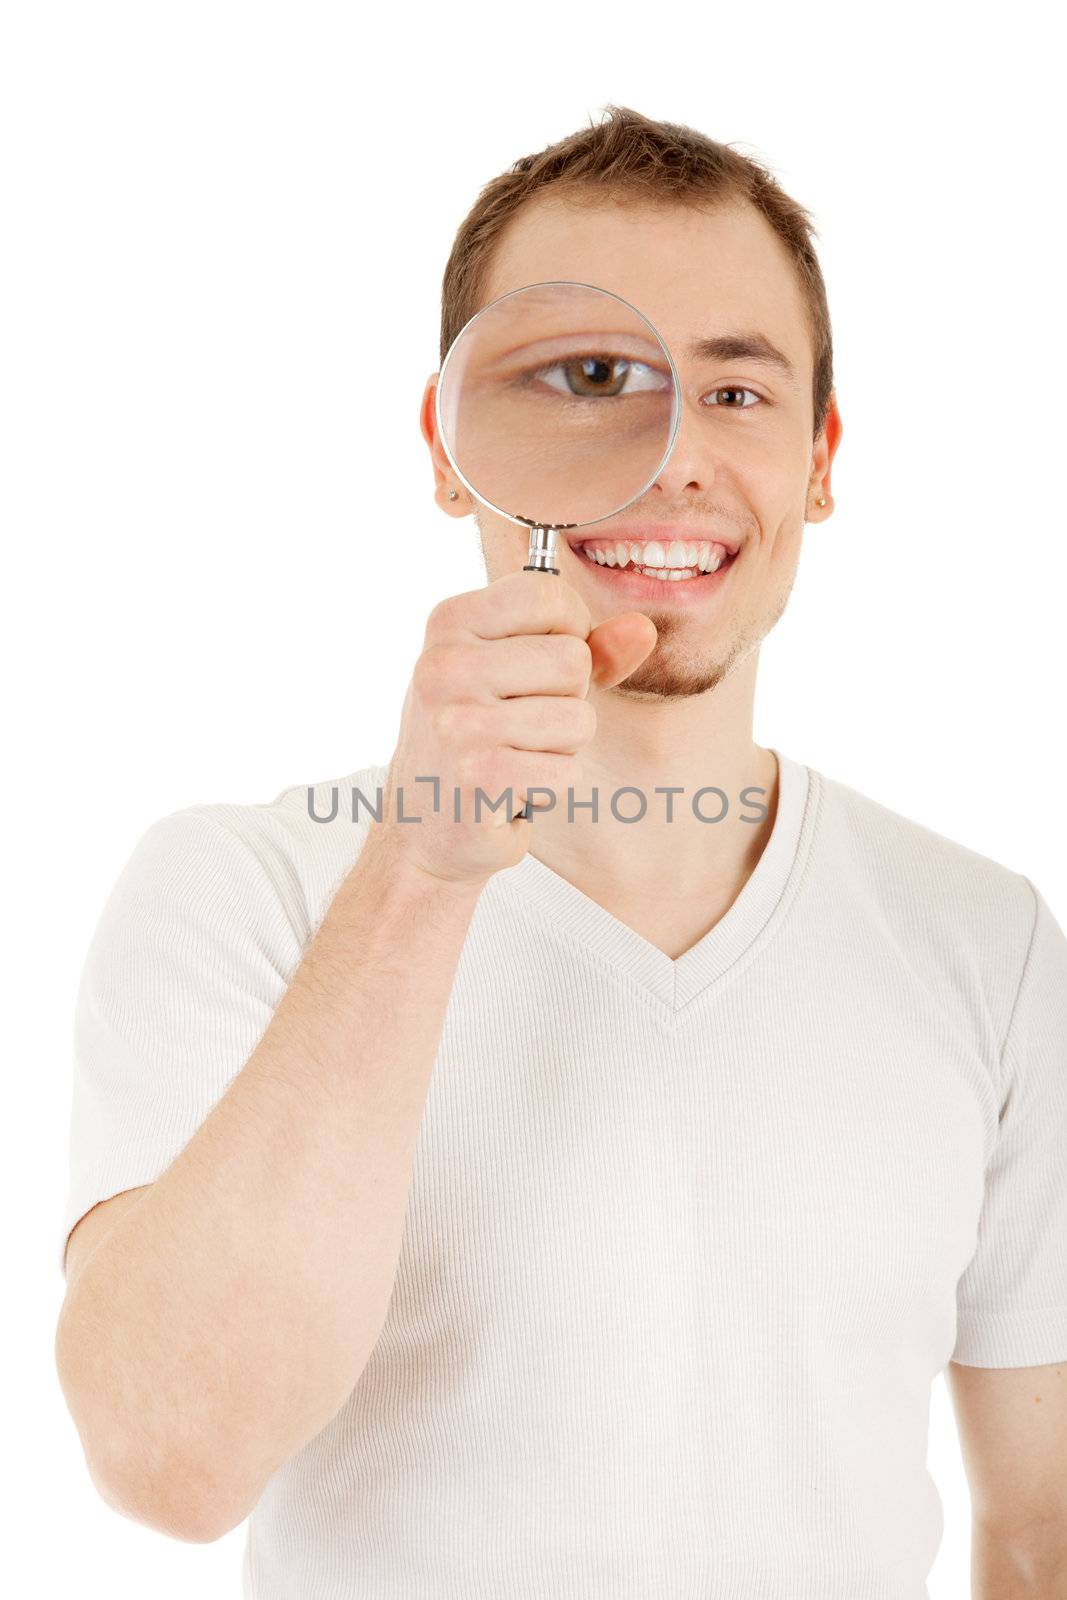 Young man in casual dress looks through magnifying glass. Focus on the man's face. Isolated on white background with clipping path.